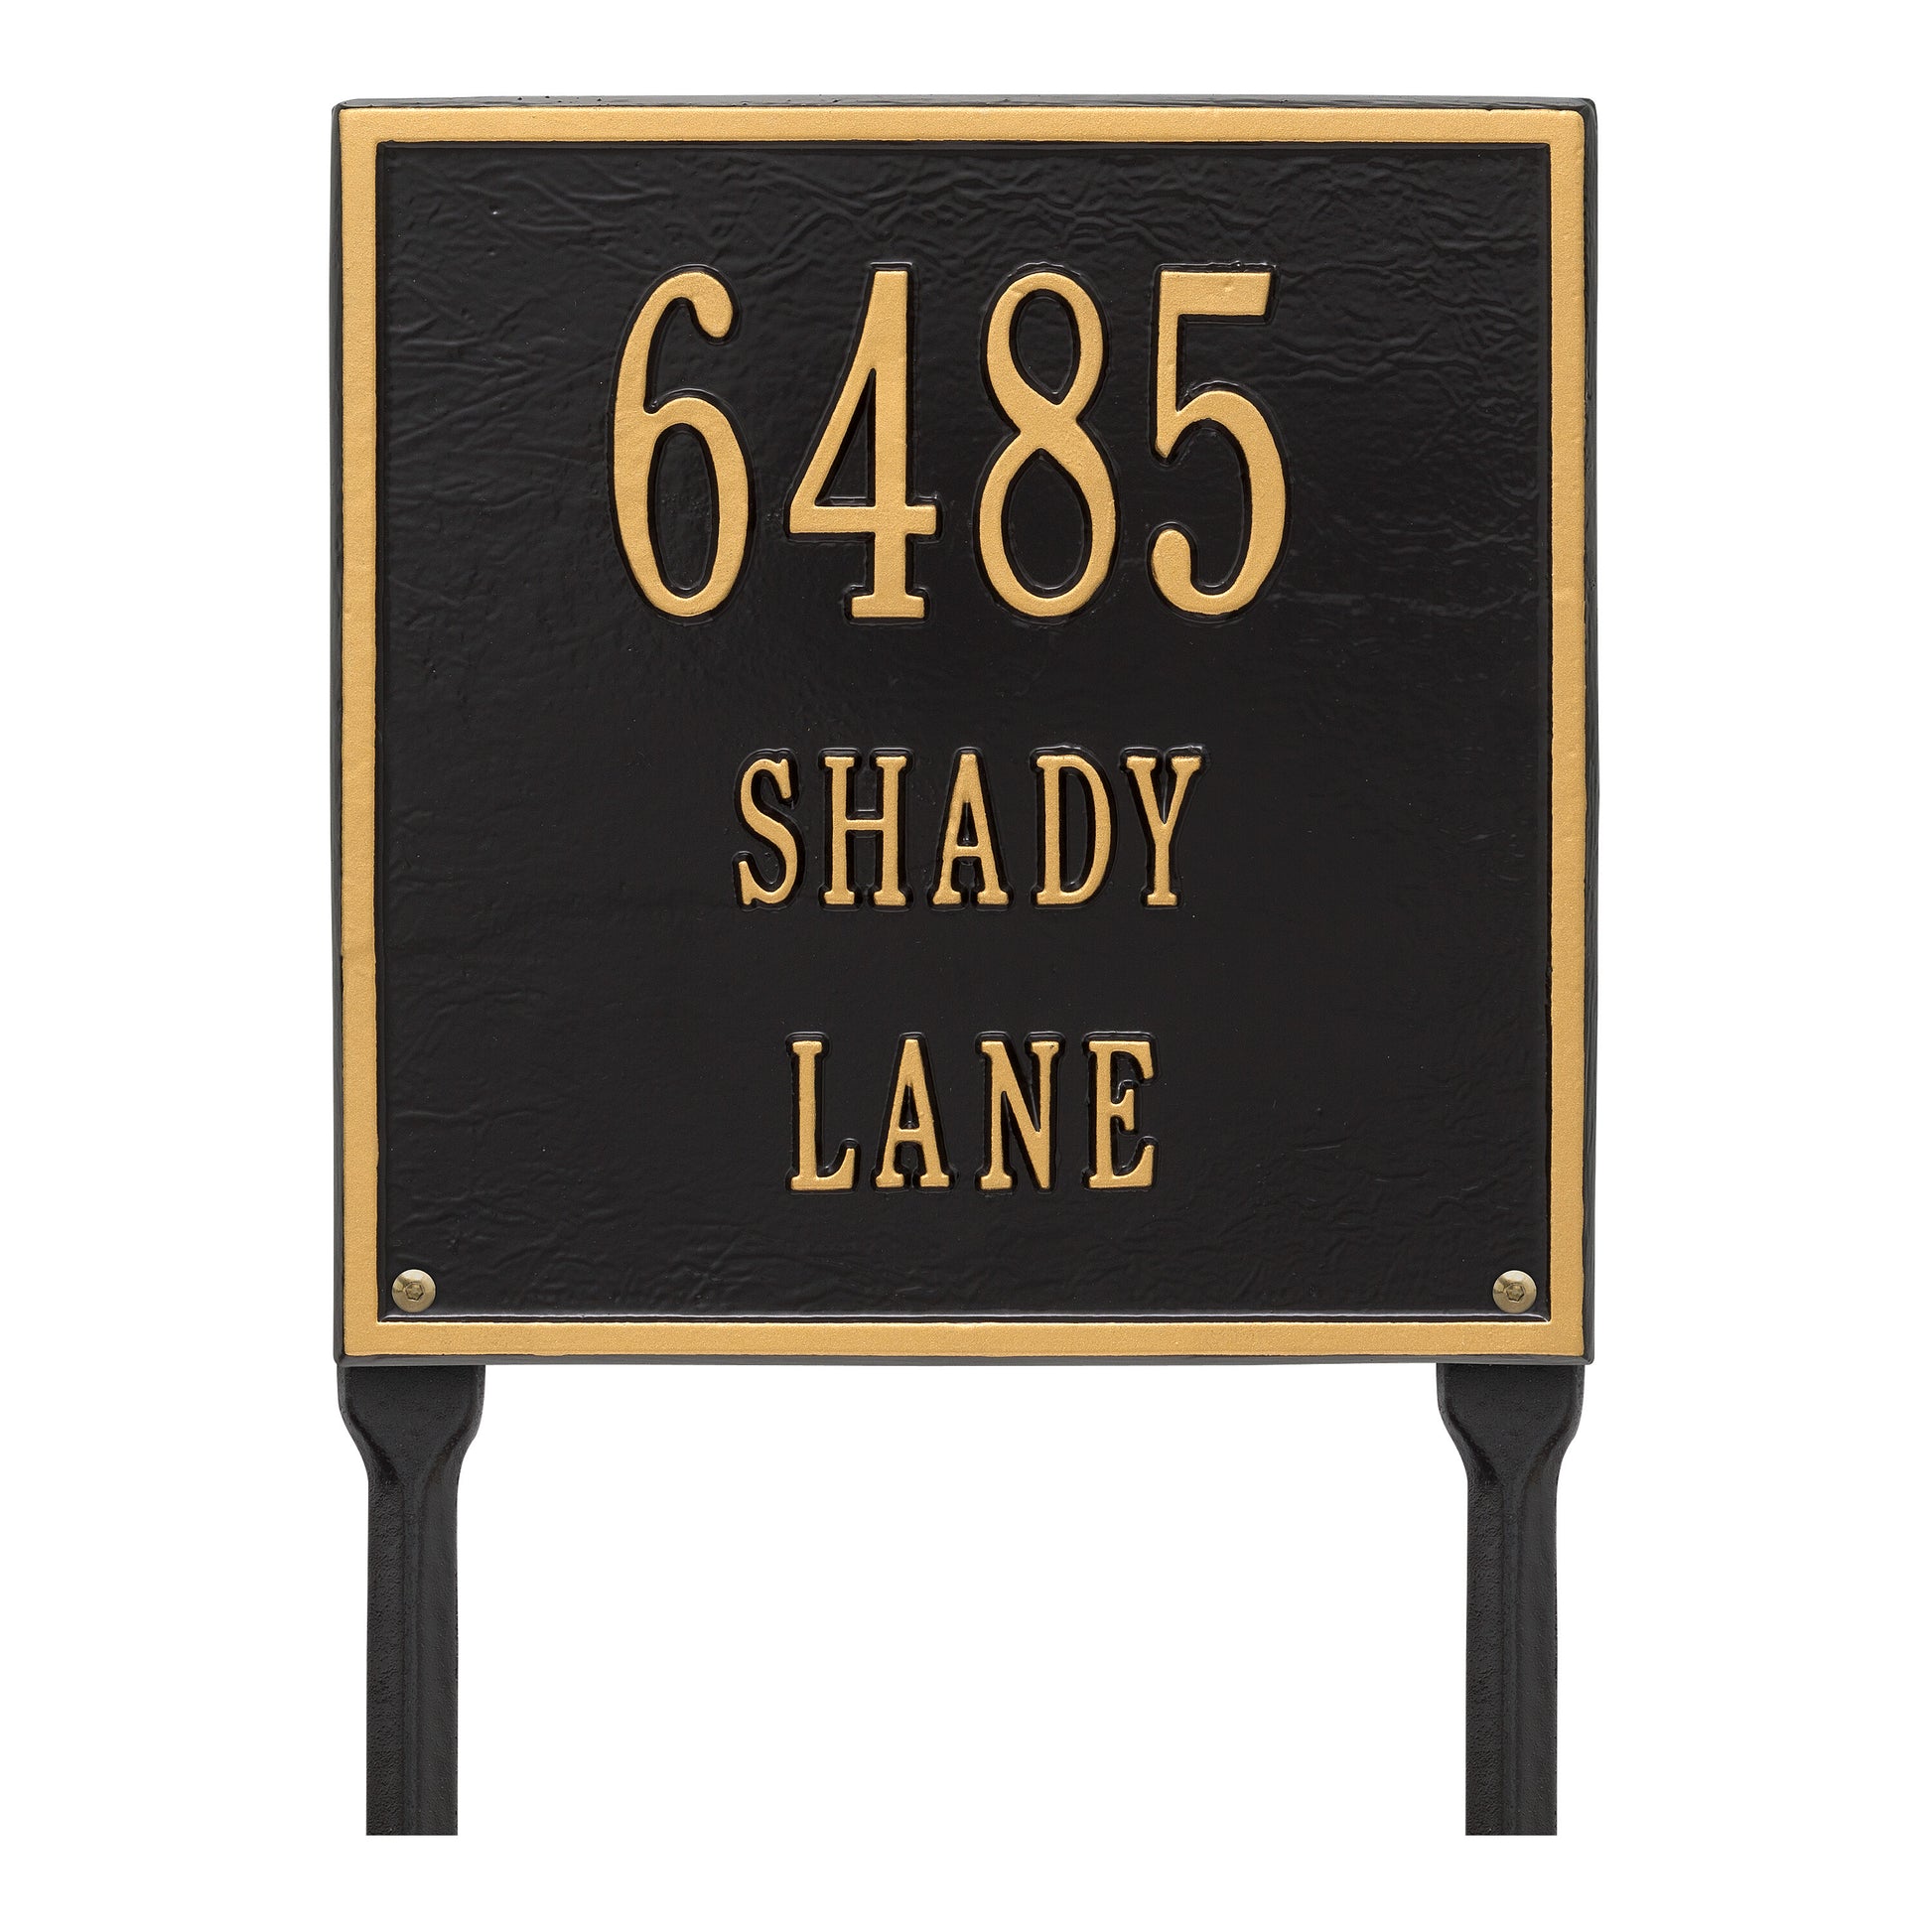 Whitehall Products Personalized Square Standard Lawn Plaque Three Line Black/silver